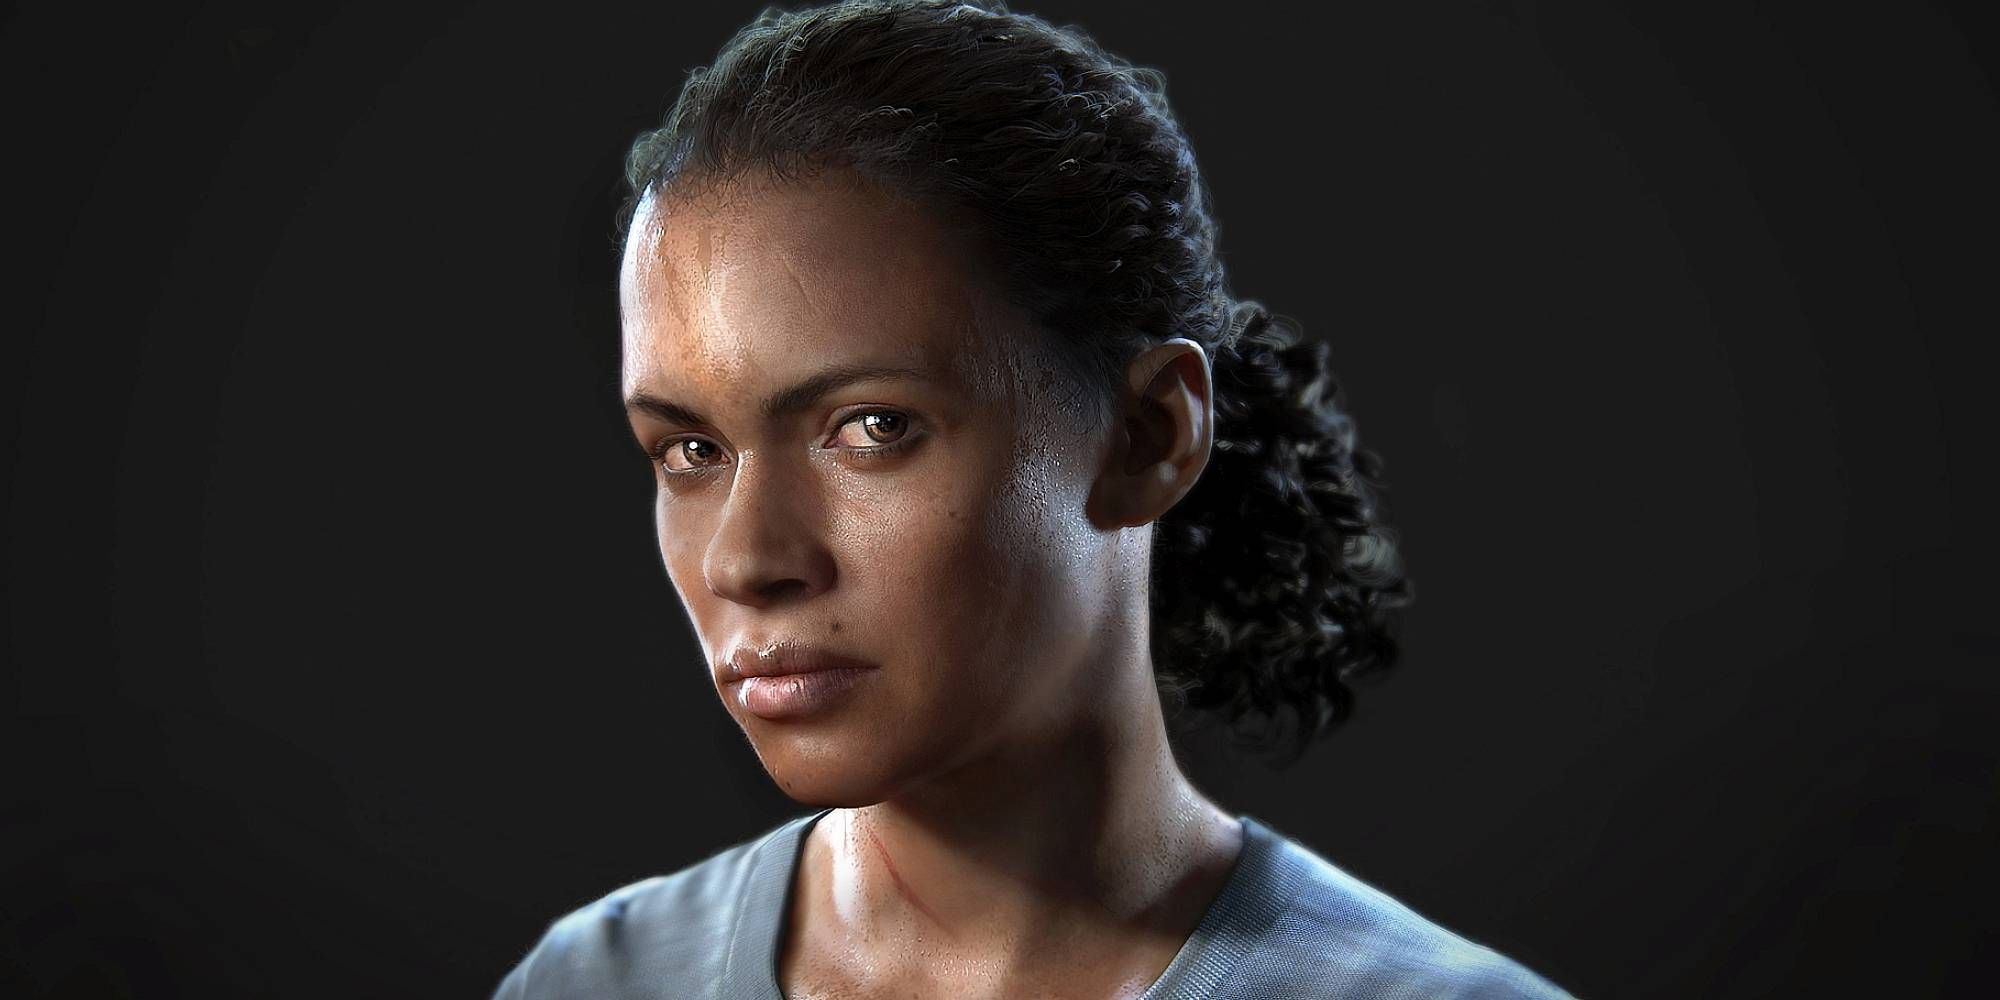 Nadine Ross from Uncharted 4 and Uncharted: Lost Legacy looks into the camera